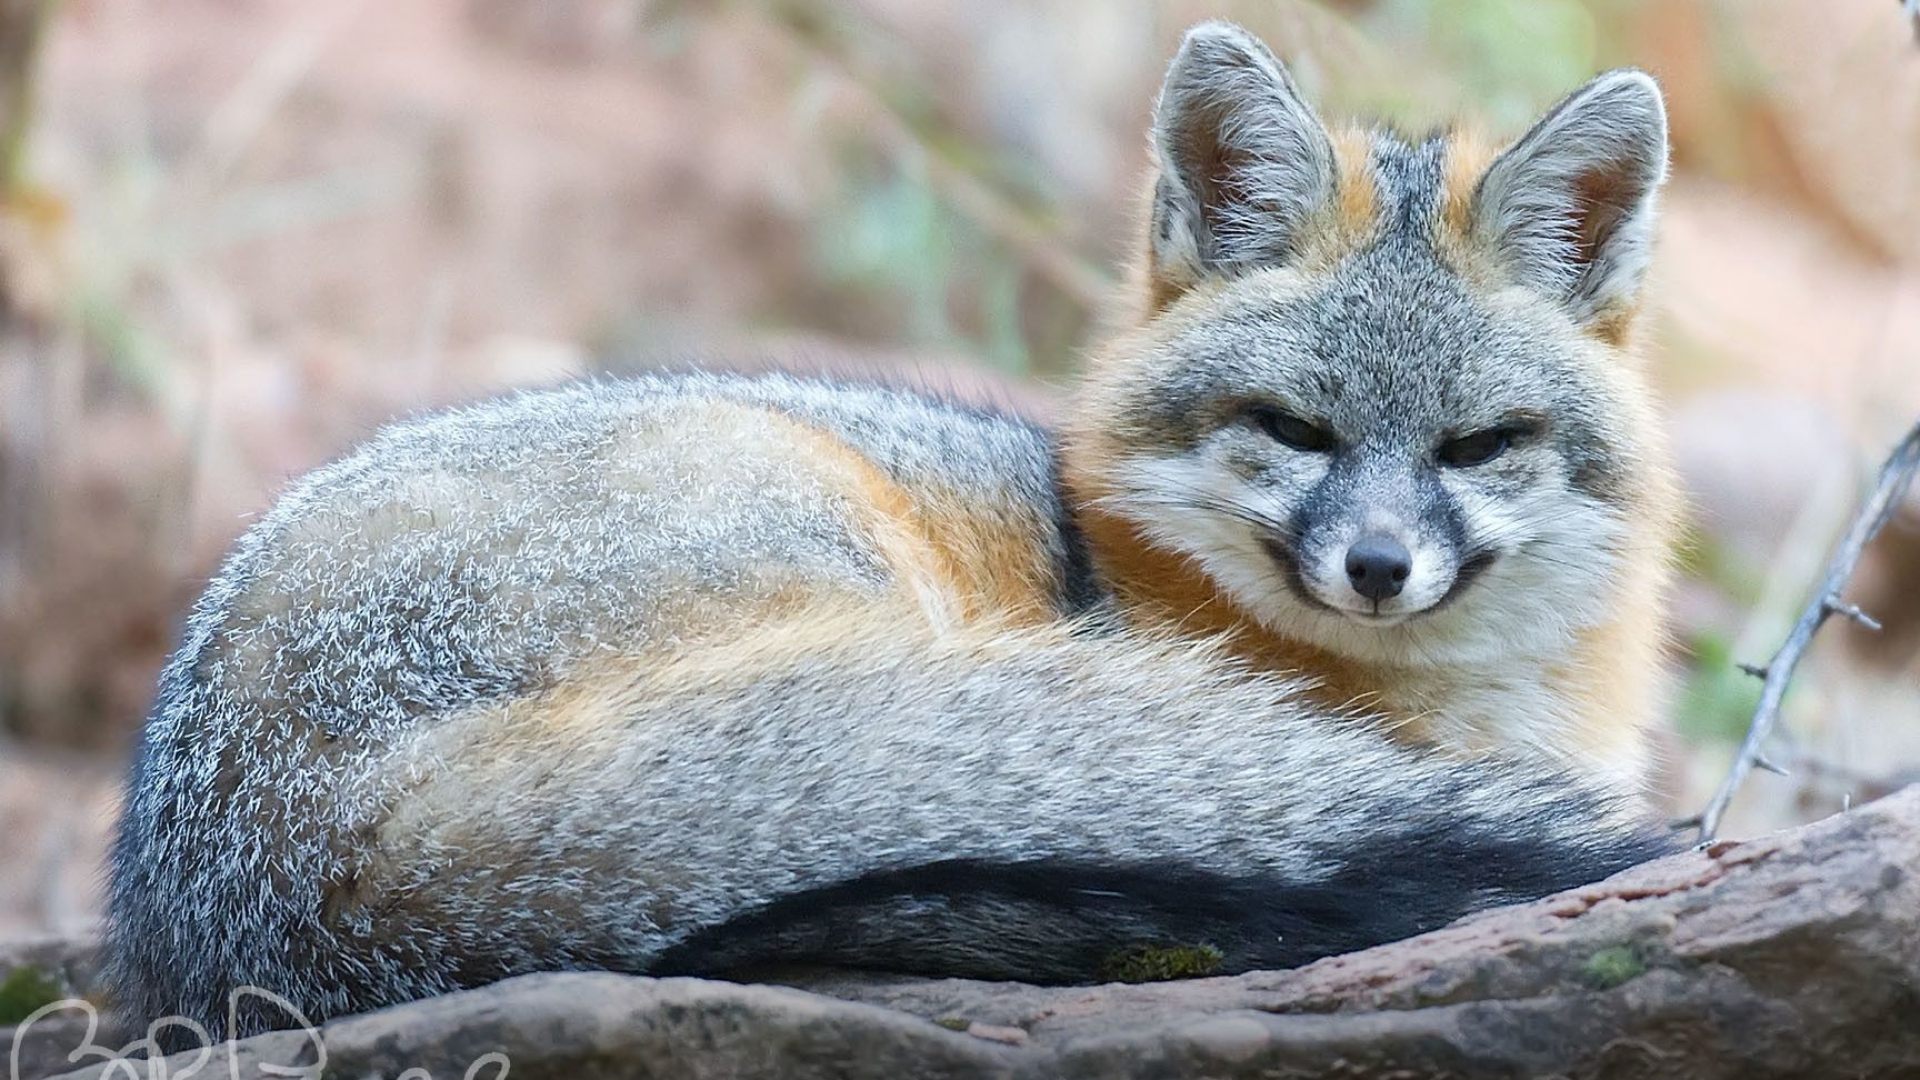 Gray Fox: An omnivore with grizzled gray fur and a black-tipped tail, Canidae, One of six North American fox species. 1920x1080 Full HD Wallpaper.